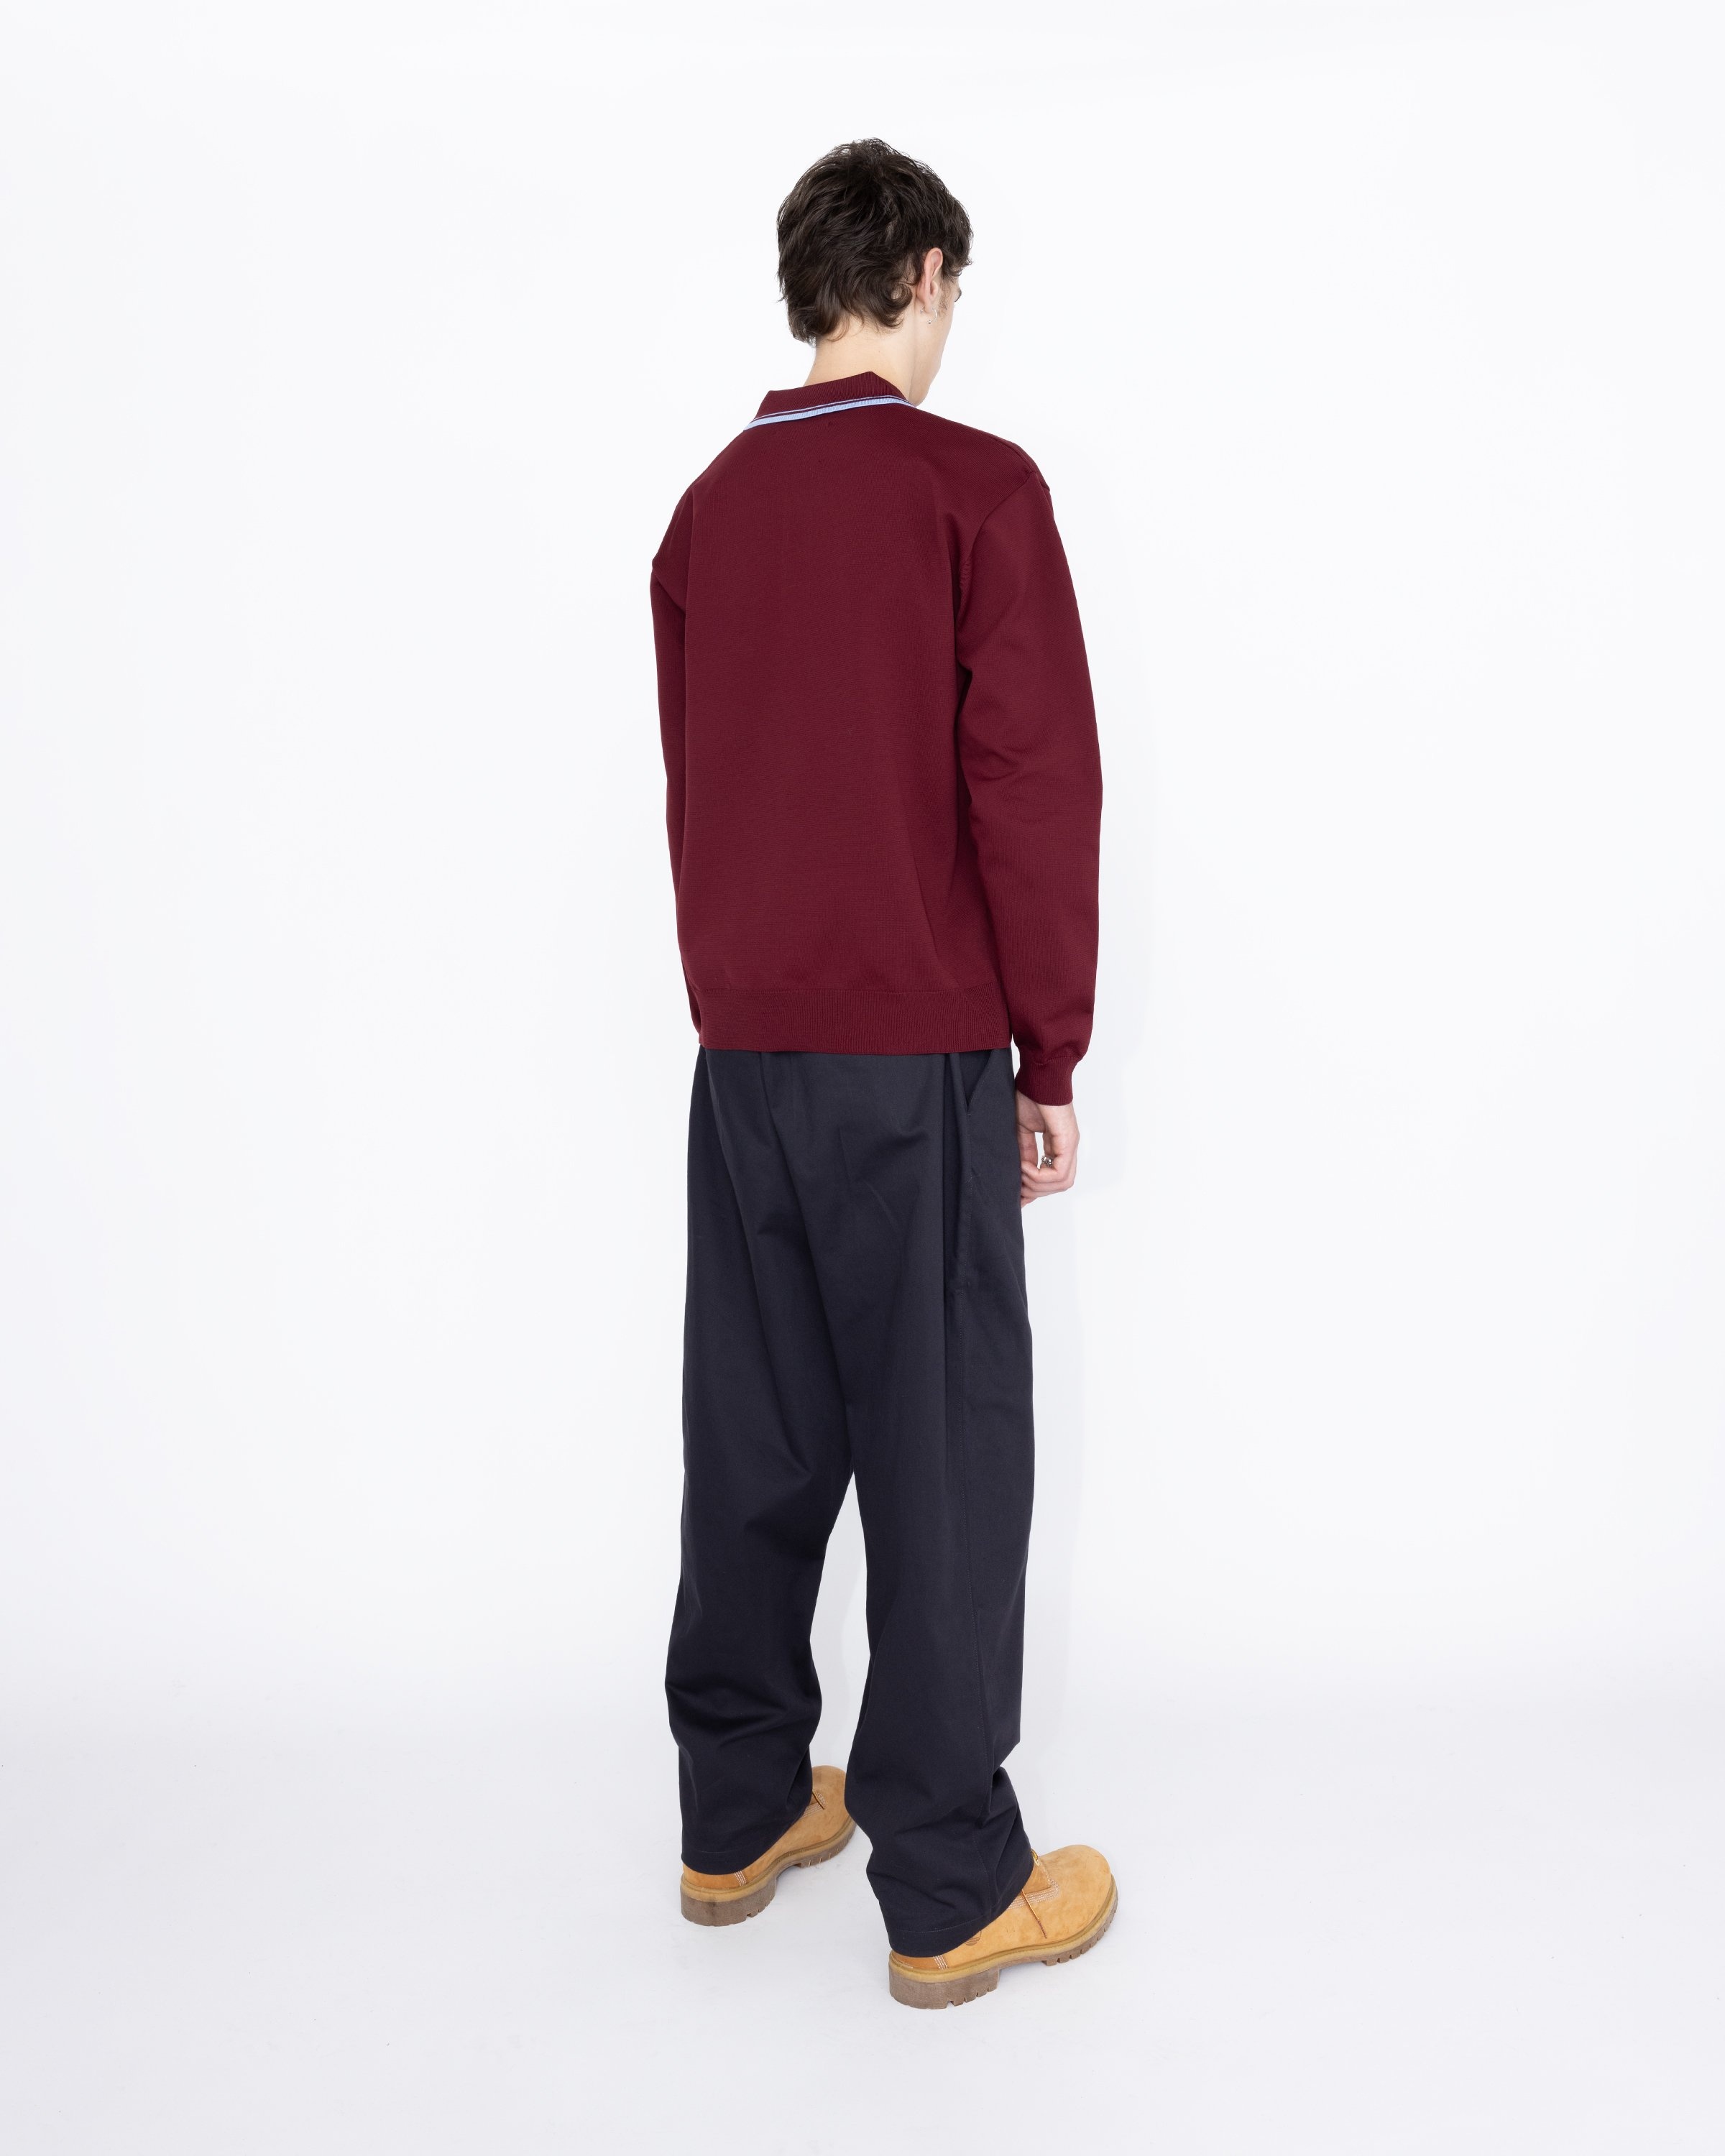 Highsnobiety HS05 – Long Sleeves Knit Polo Bordeaux - Longsleeves - Red - Image 5